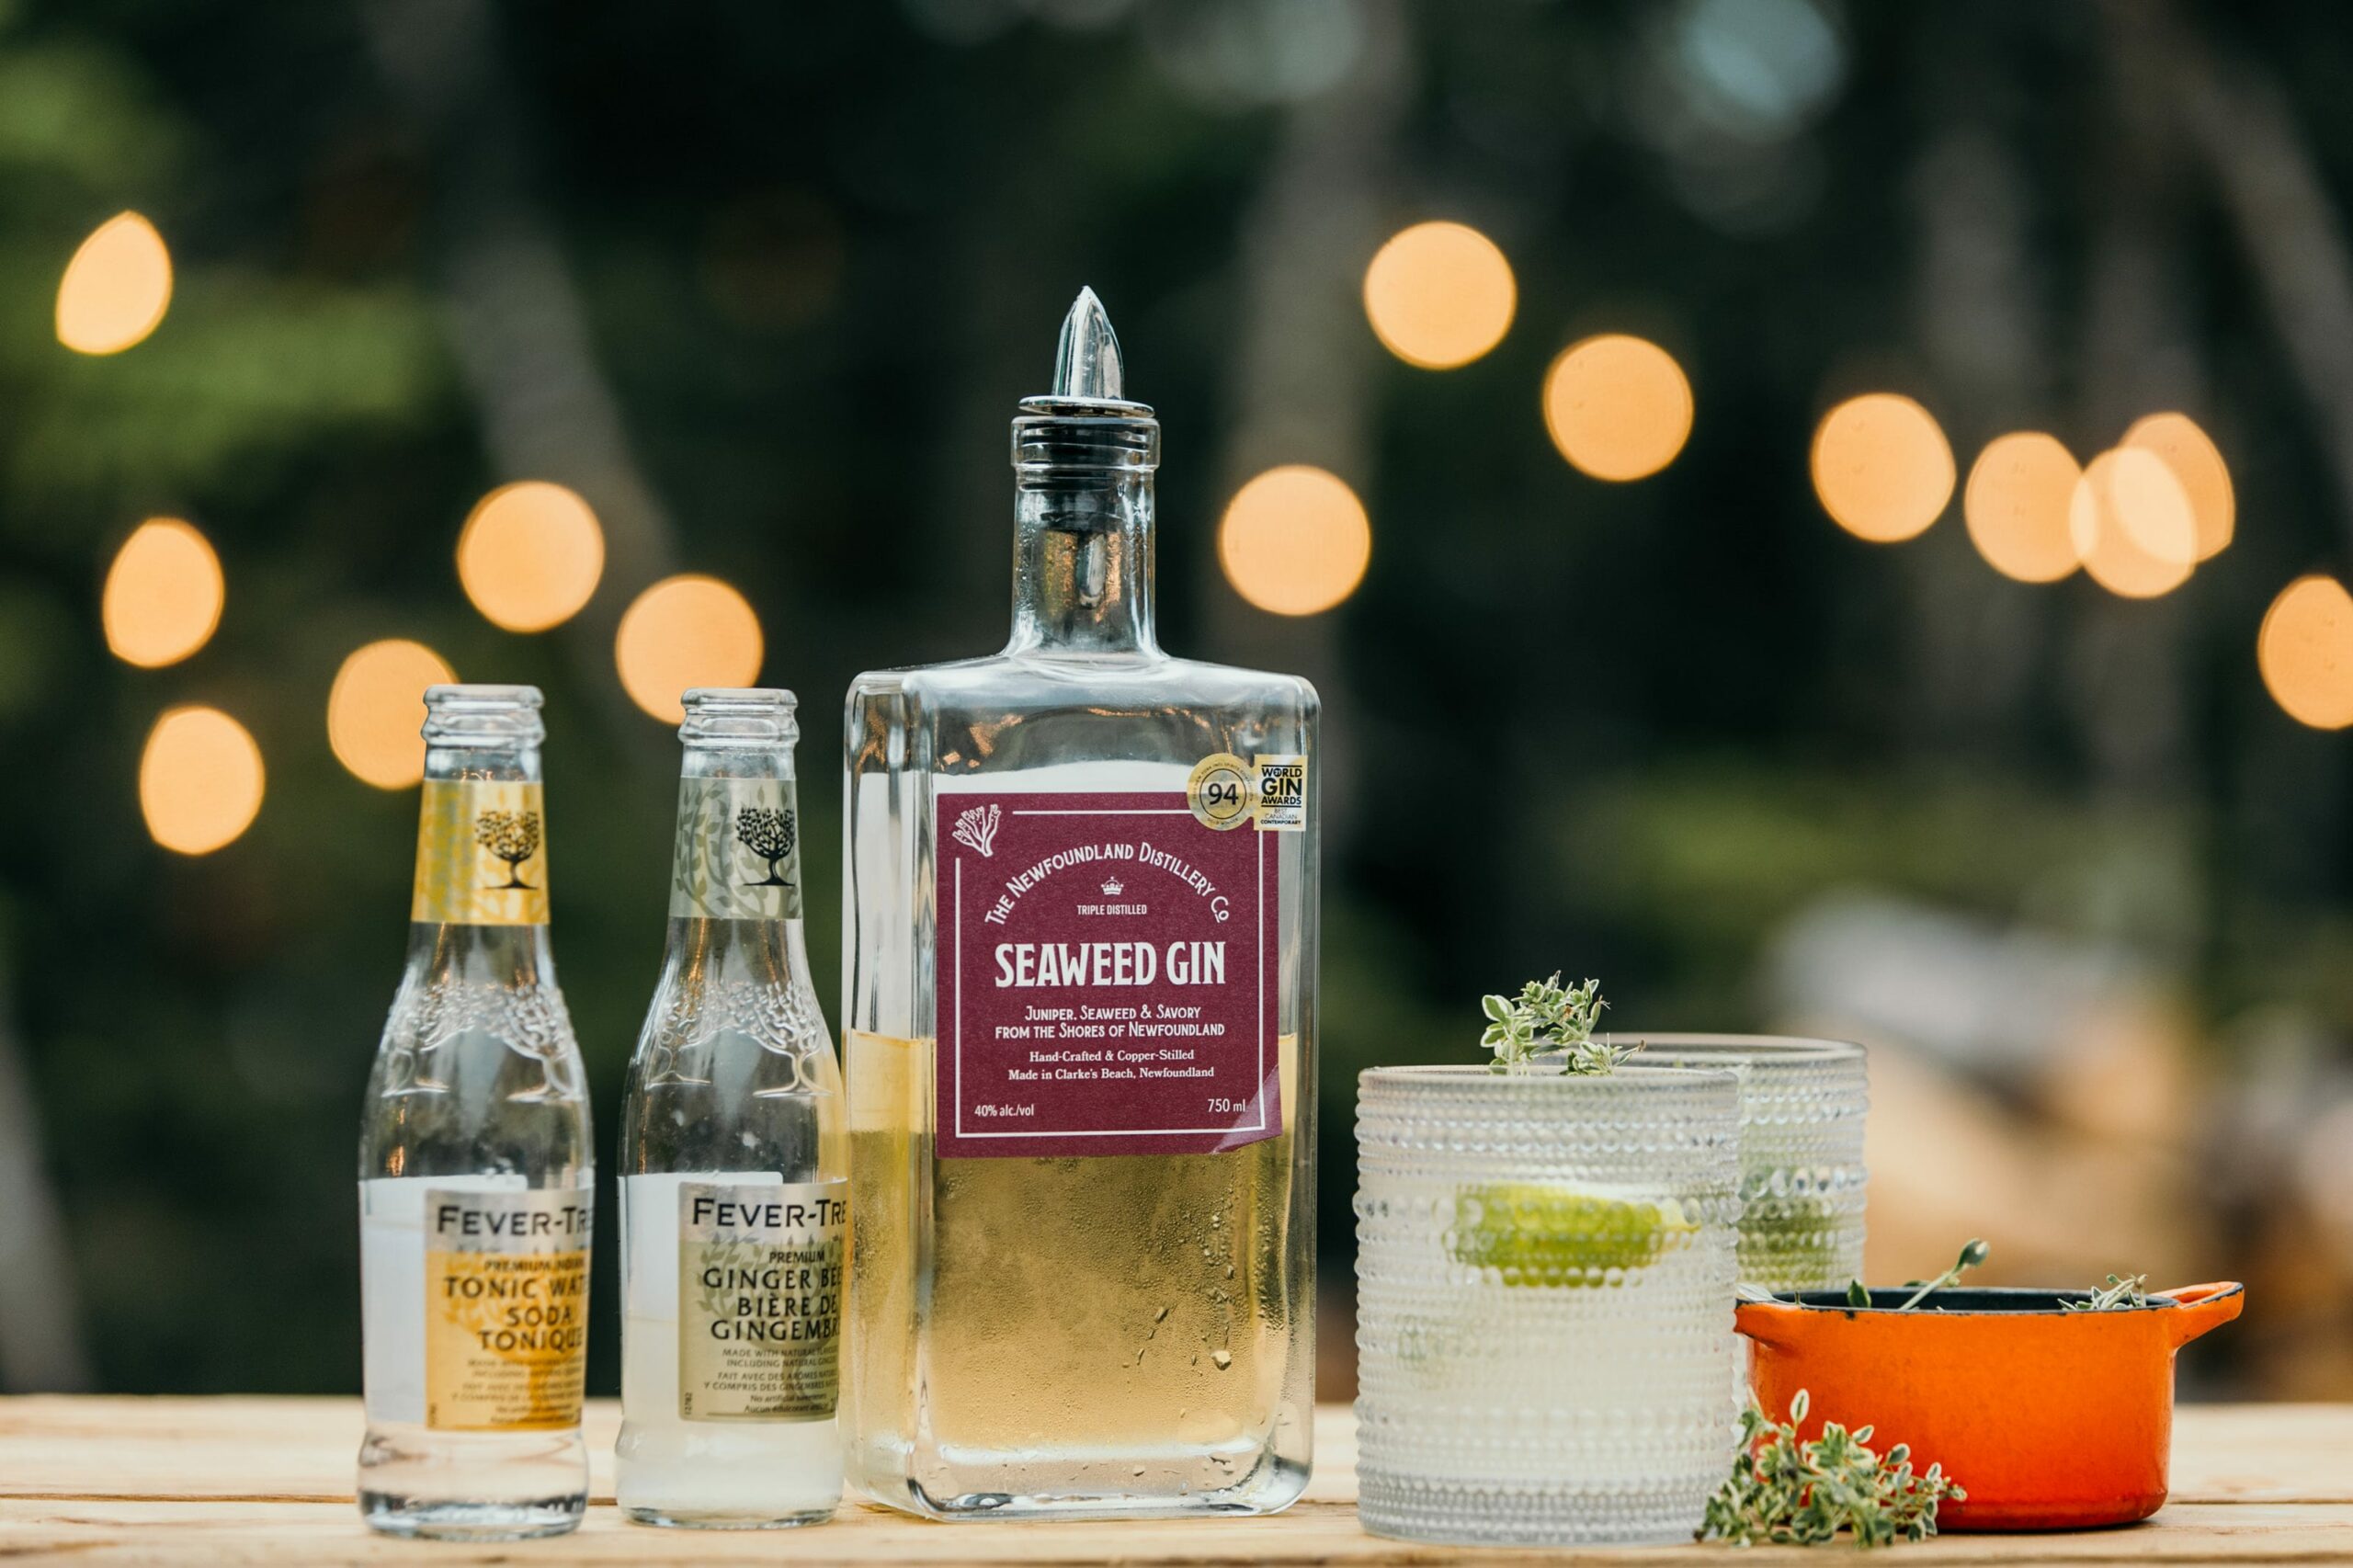 Seaweed gin bottle with cocktail glass